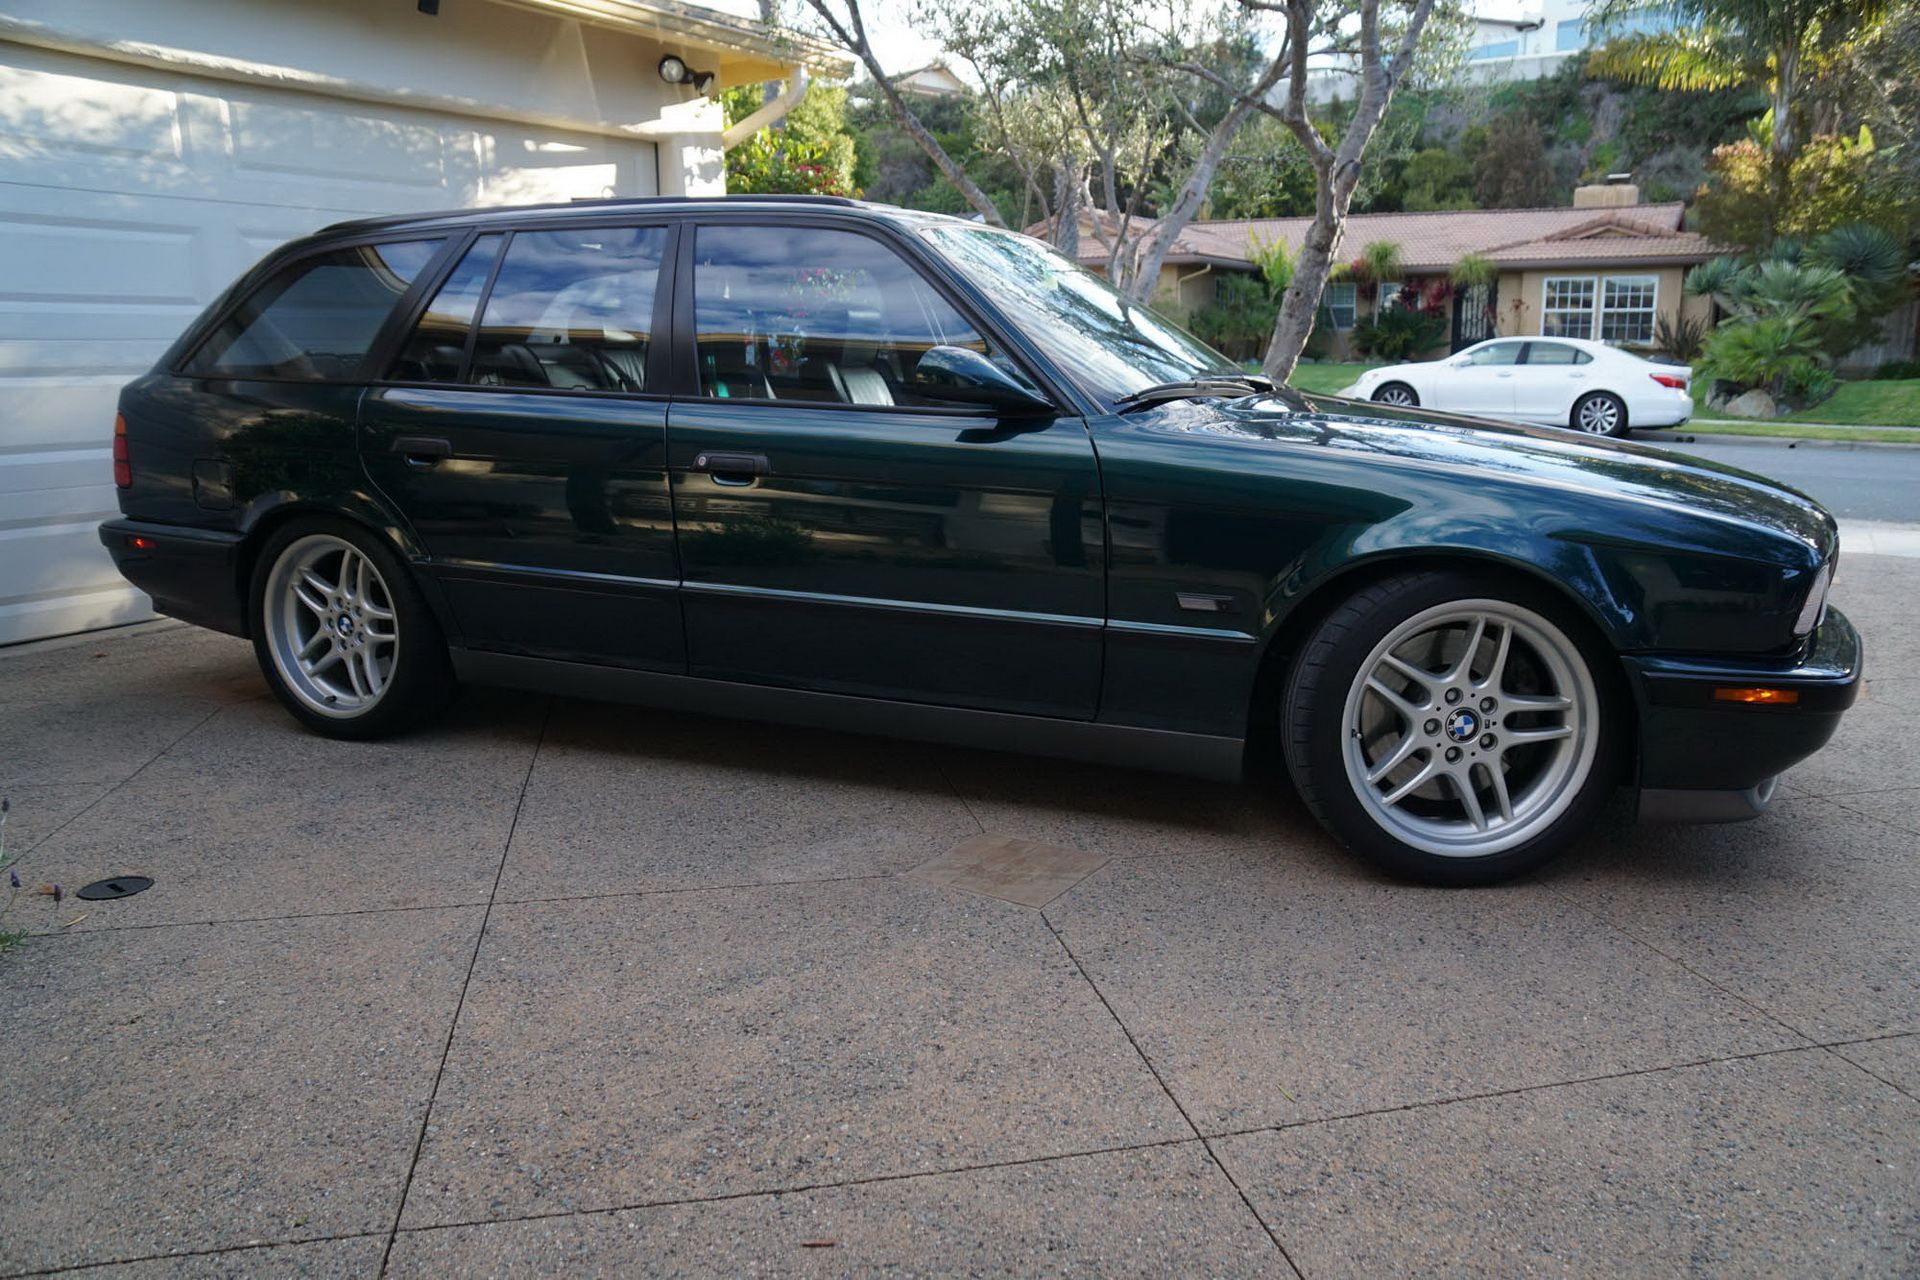 Oxford Green BMW E34 M5 Touring Is Just Pure Wagon Porn | Carscoops